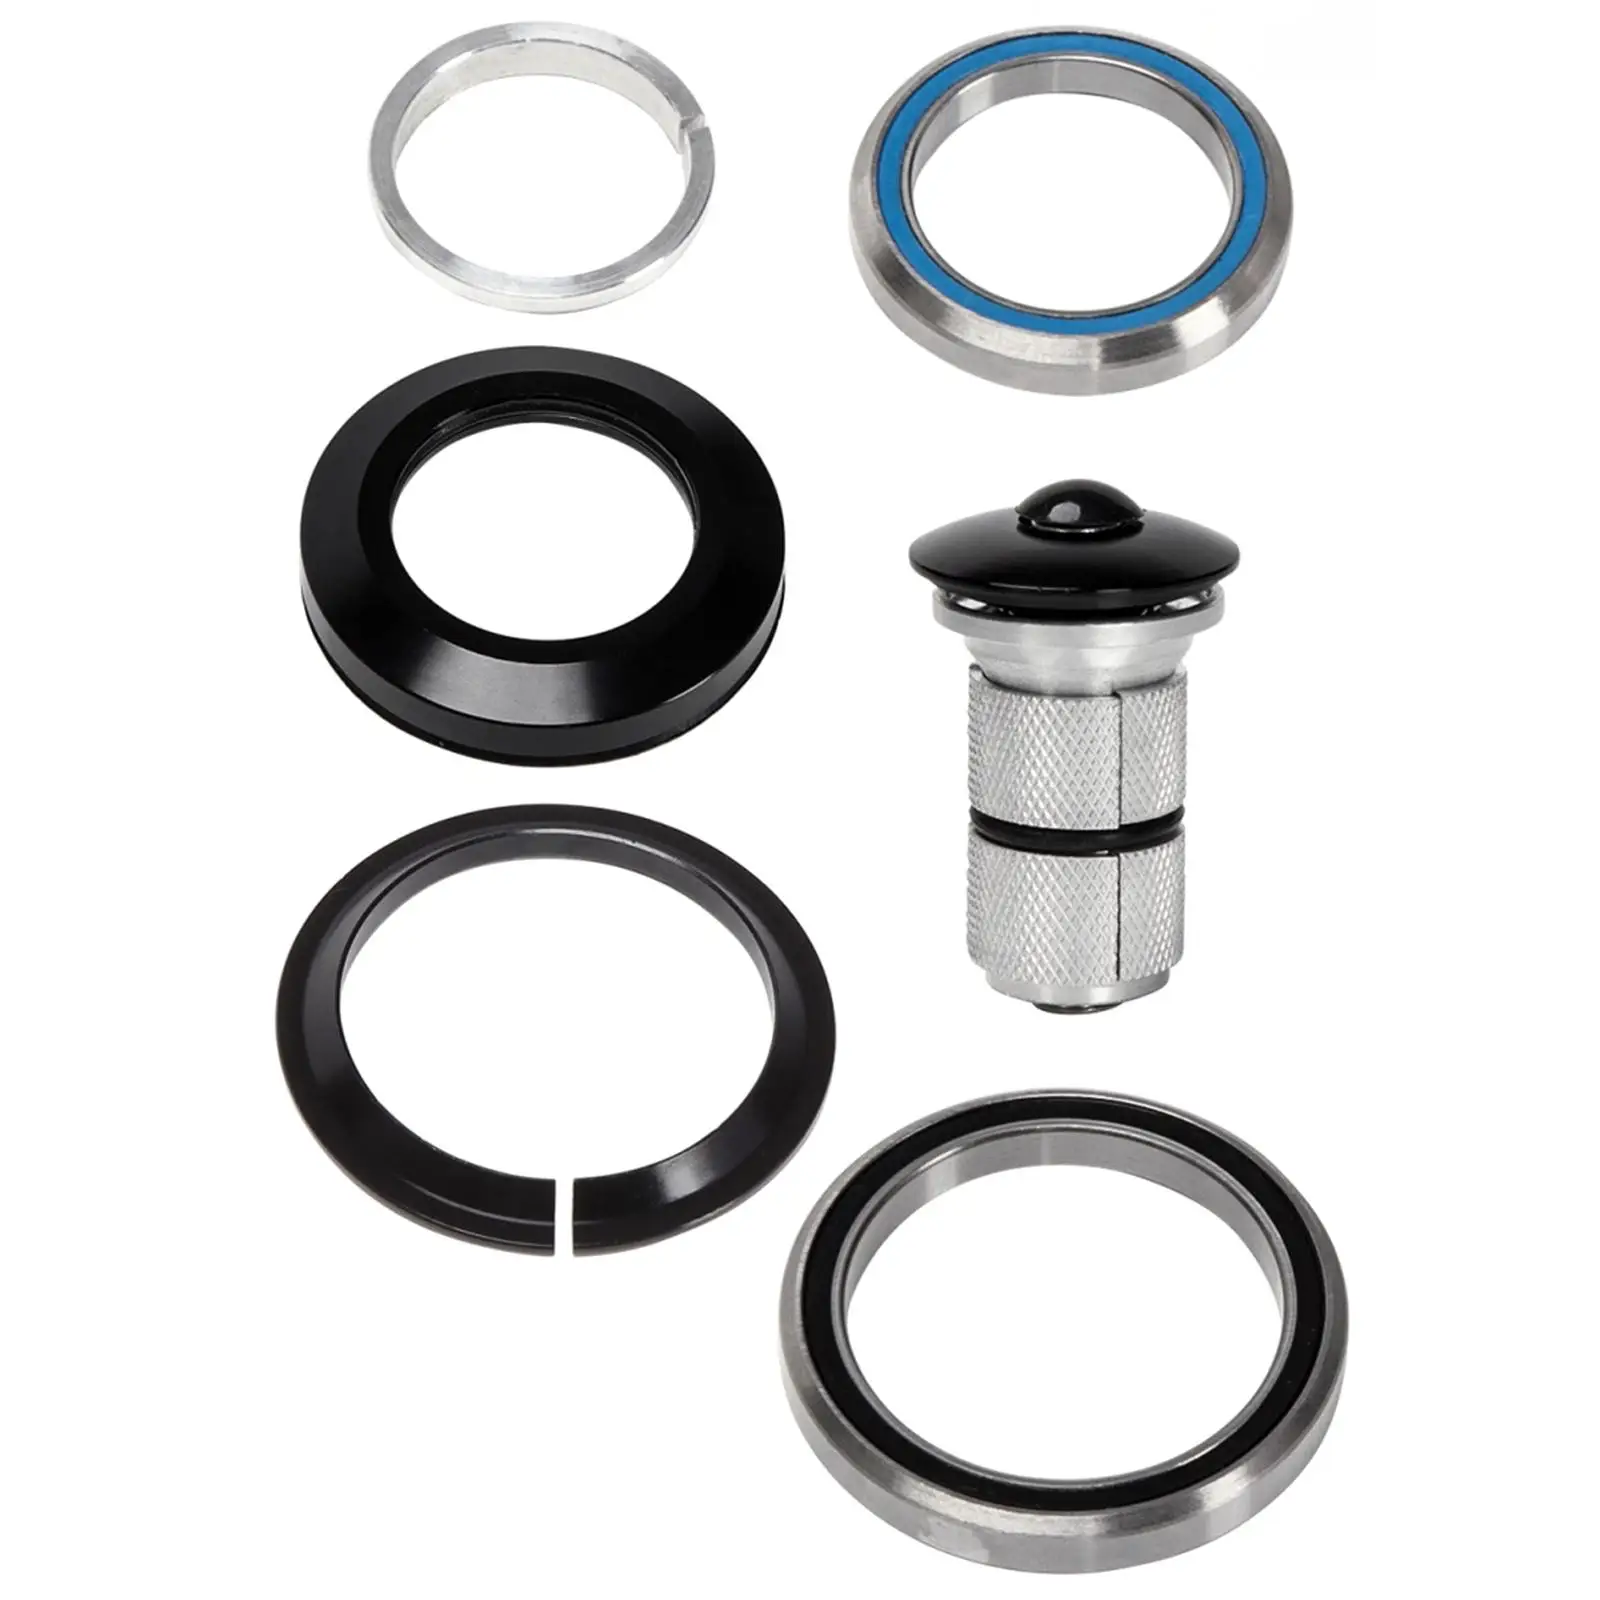 42 52mm Road Headset , Bearing Repair Parts for Tanke Mountain Bike Tapered Tube Fork ,Cycling